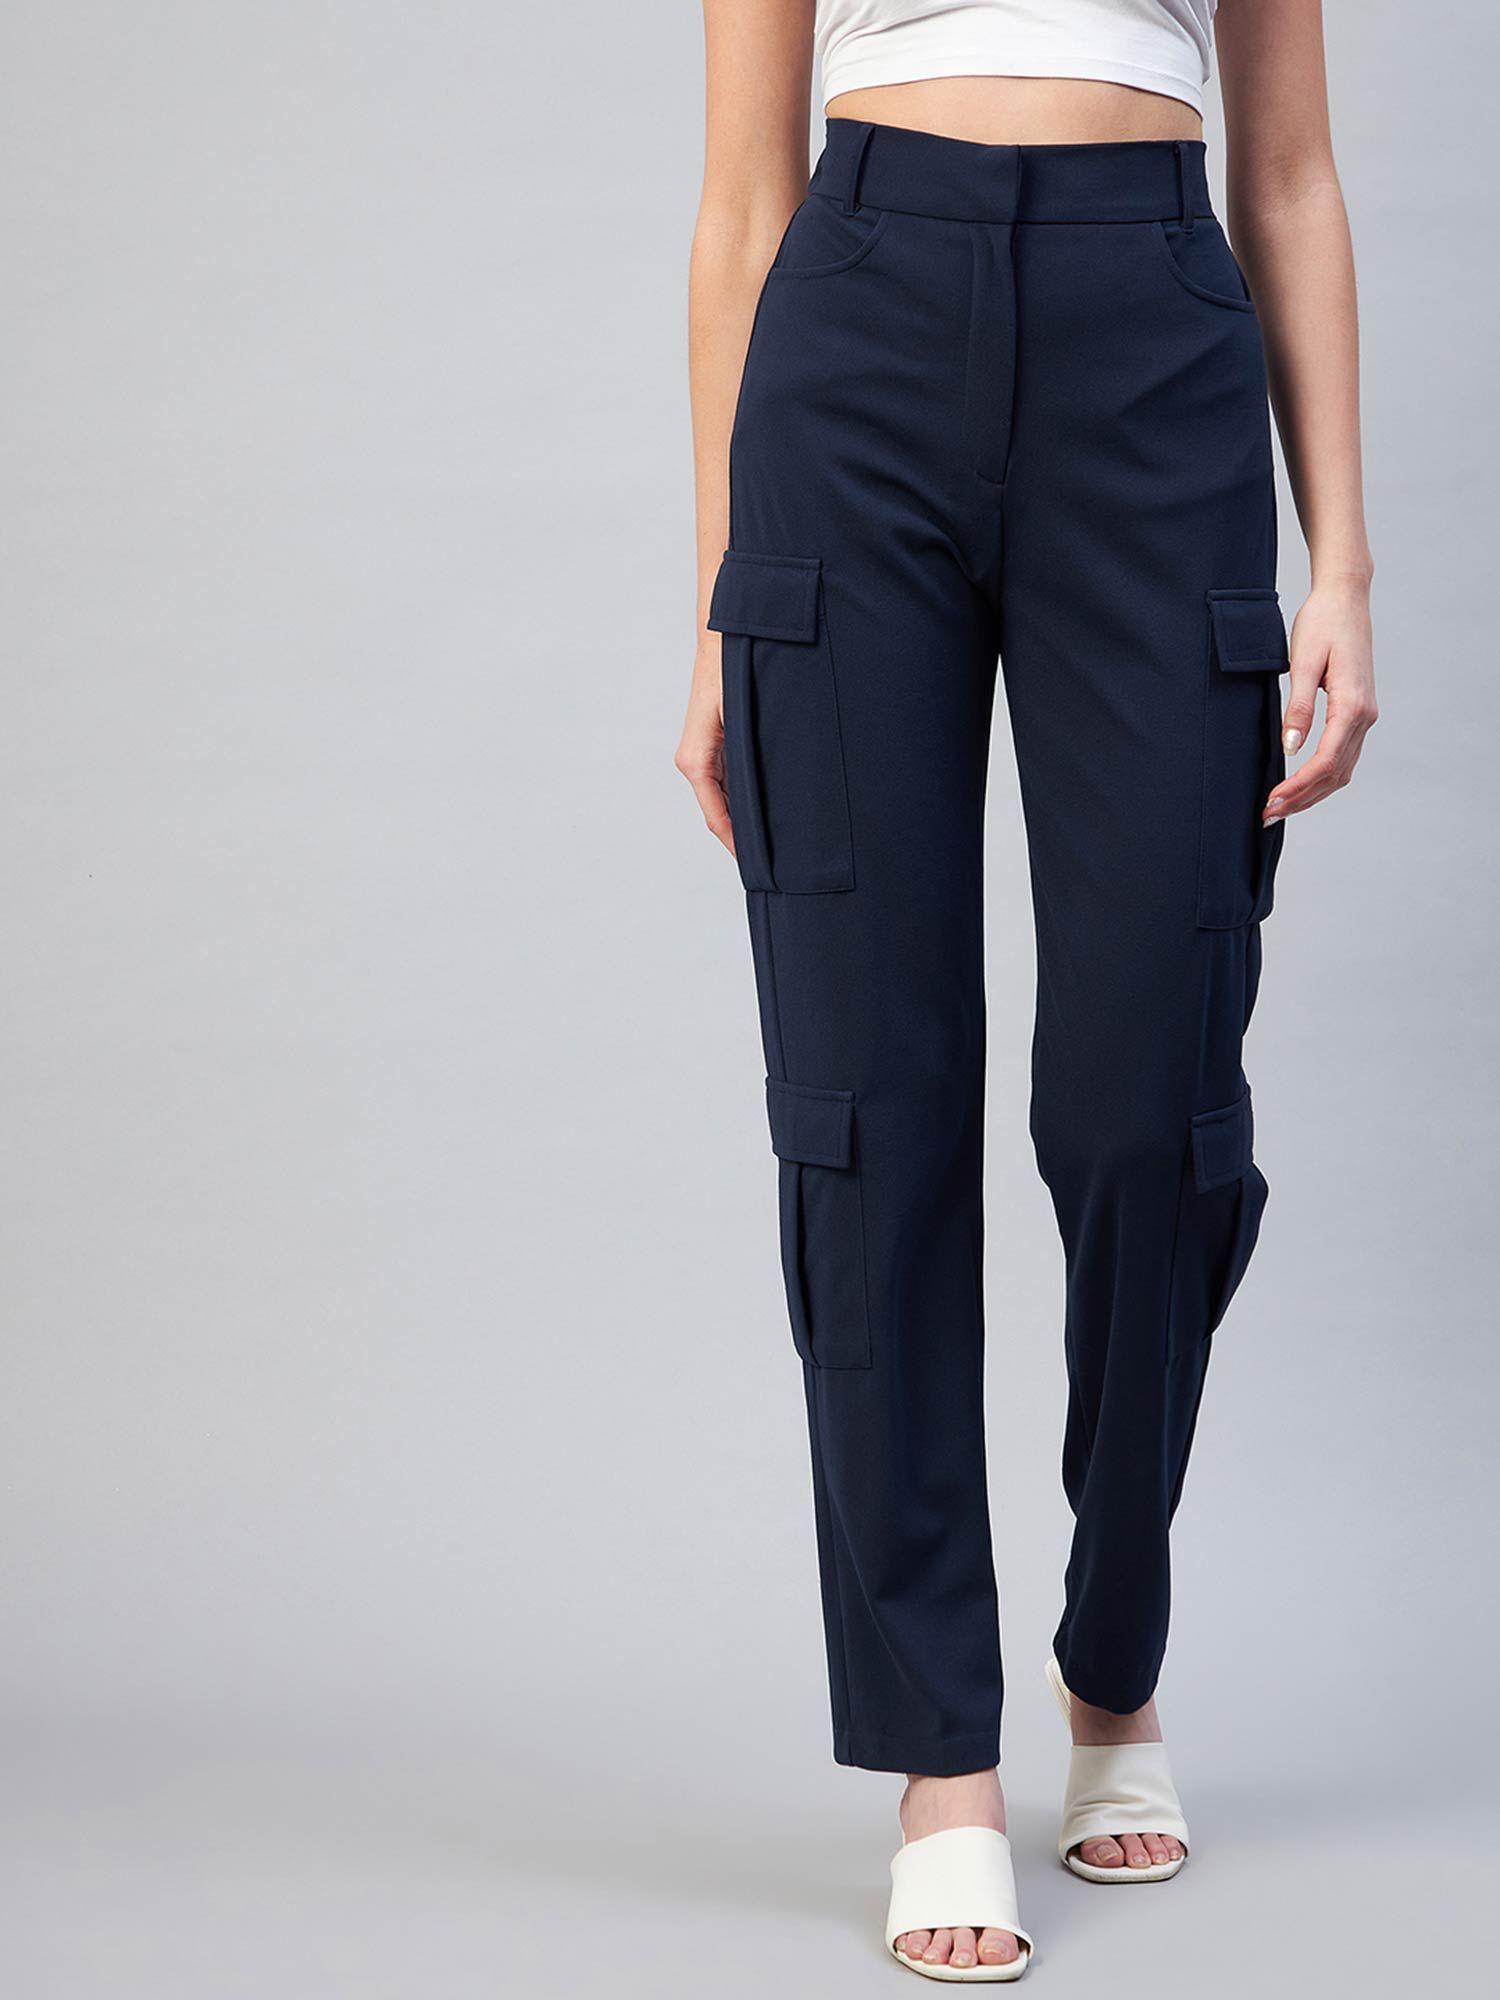 Women Casual Navy Blue Solid Cargos Trouser